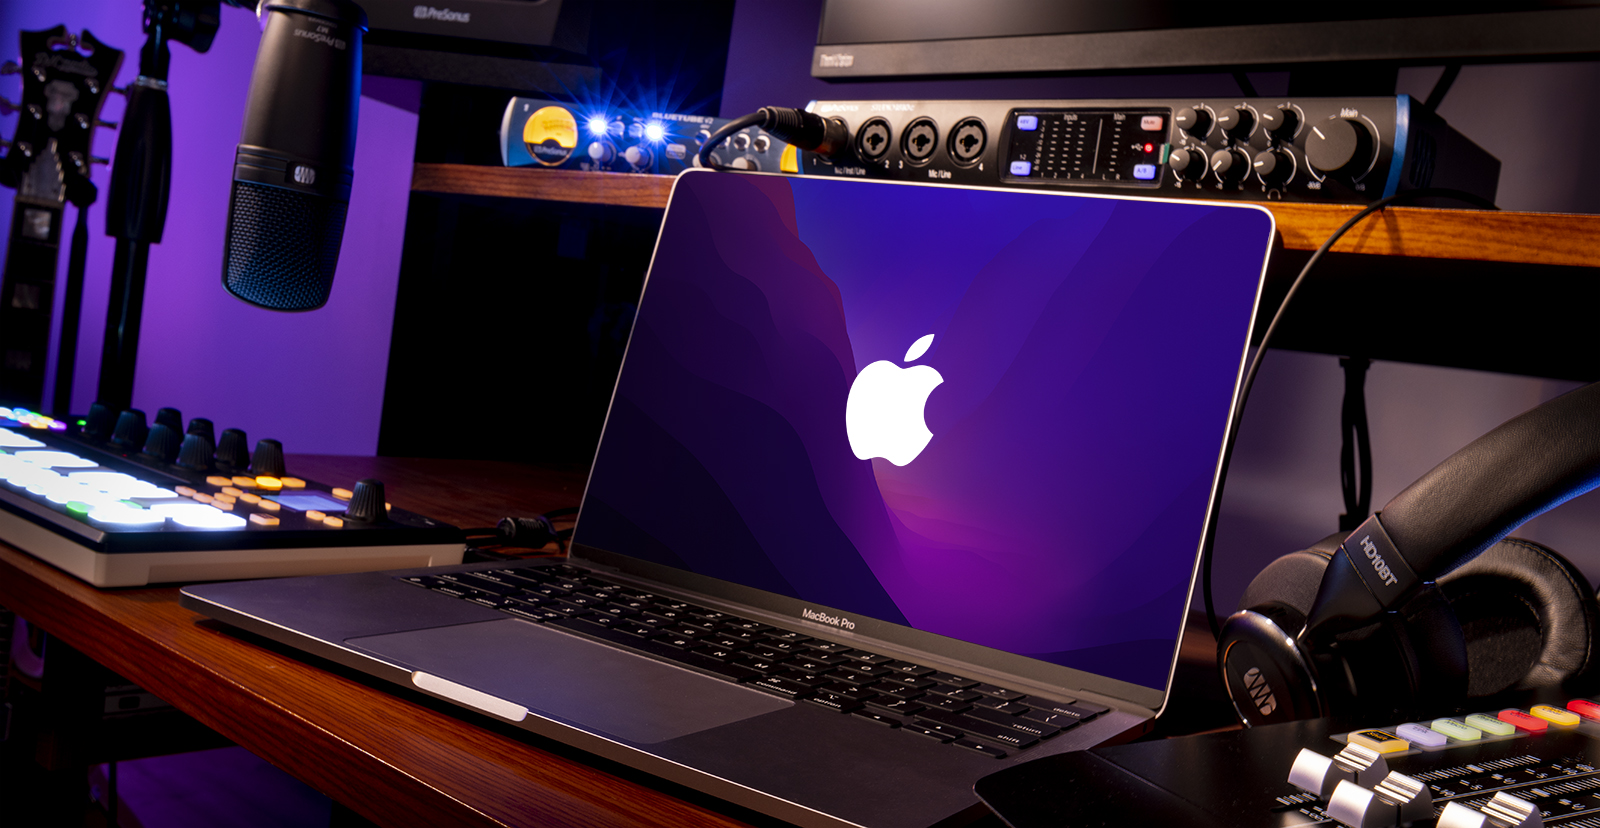 How to tell if you have an Intel-based Mac or a Mac with Apple silicon